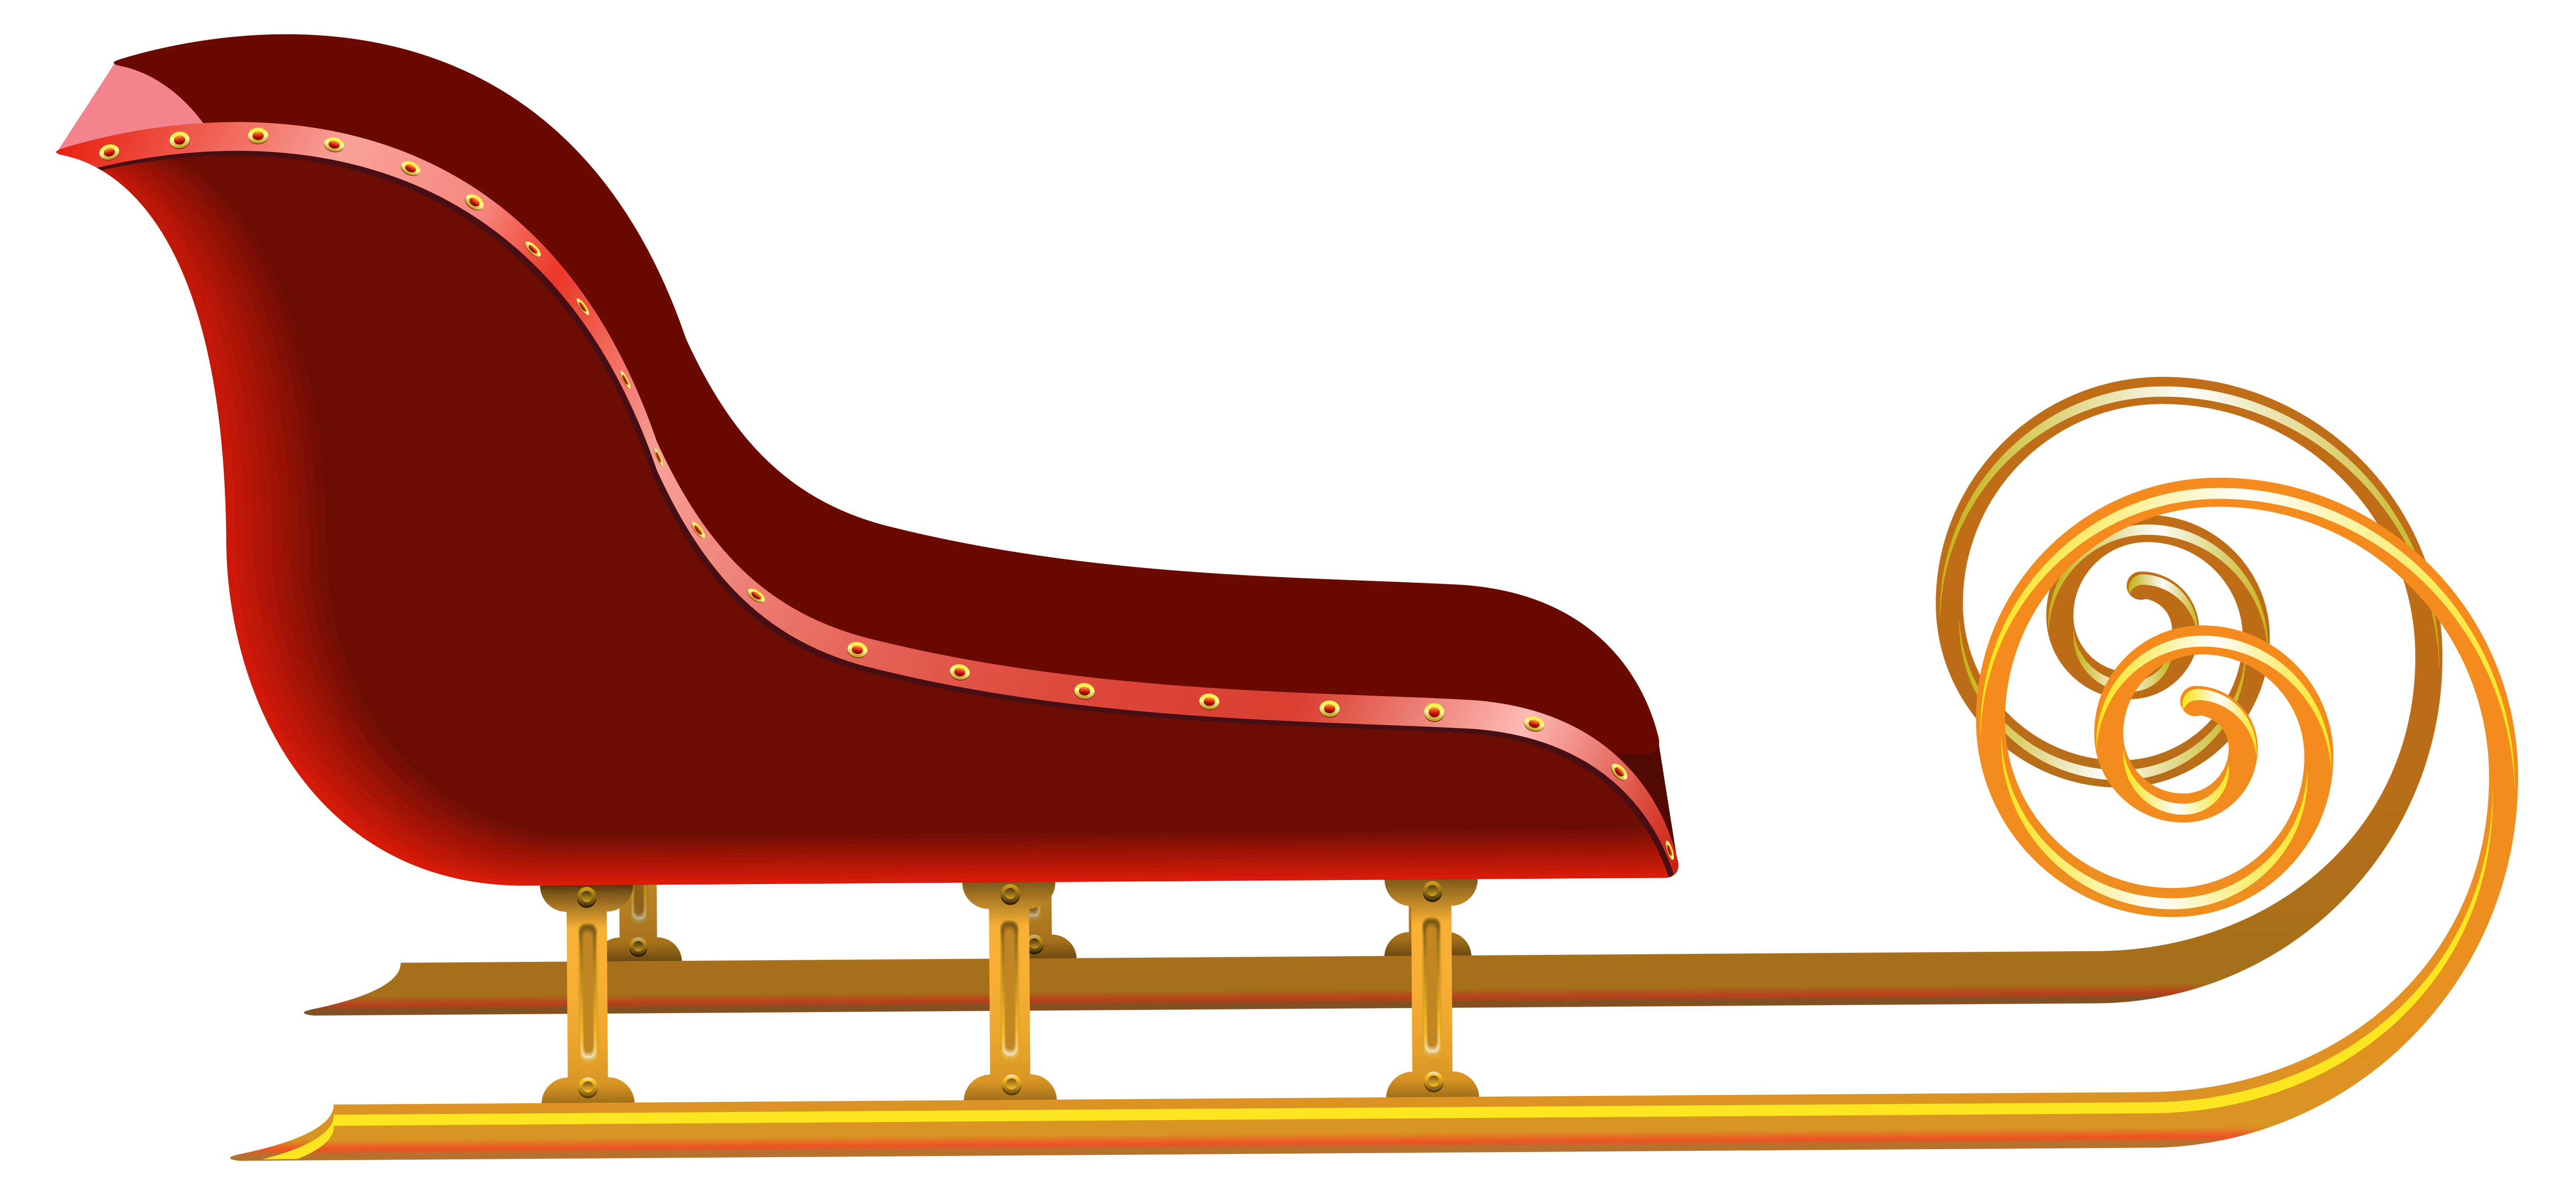 Red Sleigh PNG Clip Art Image | Gallery Yopriceville ...
